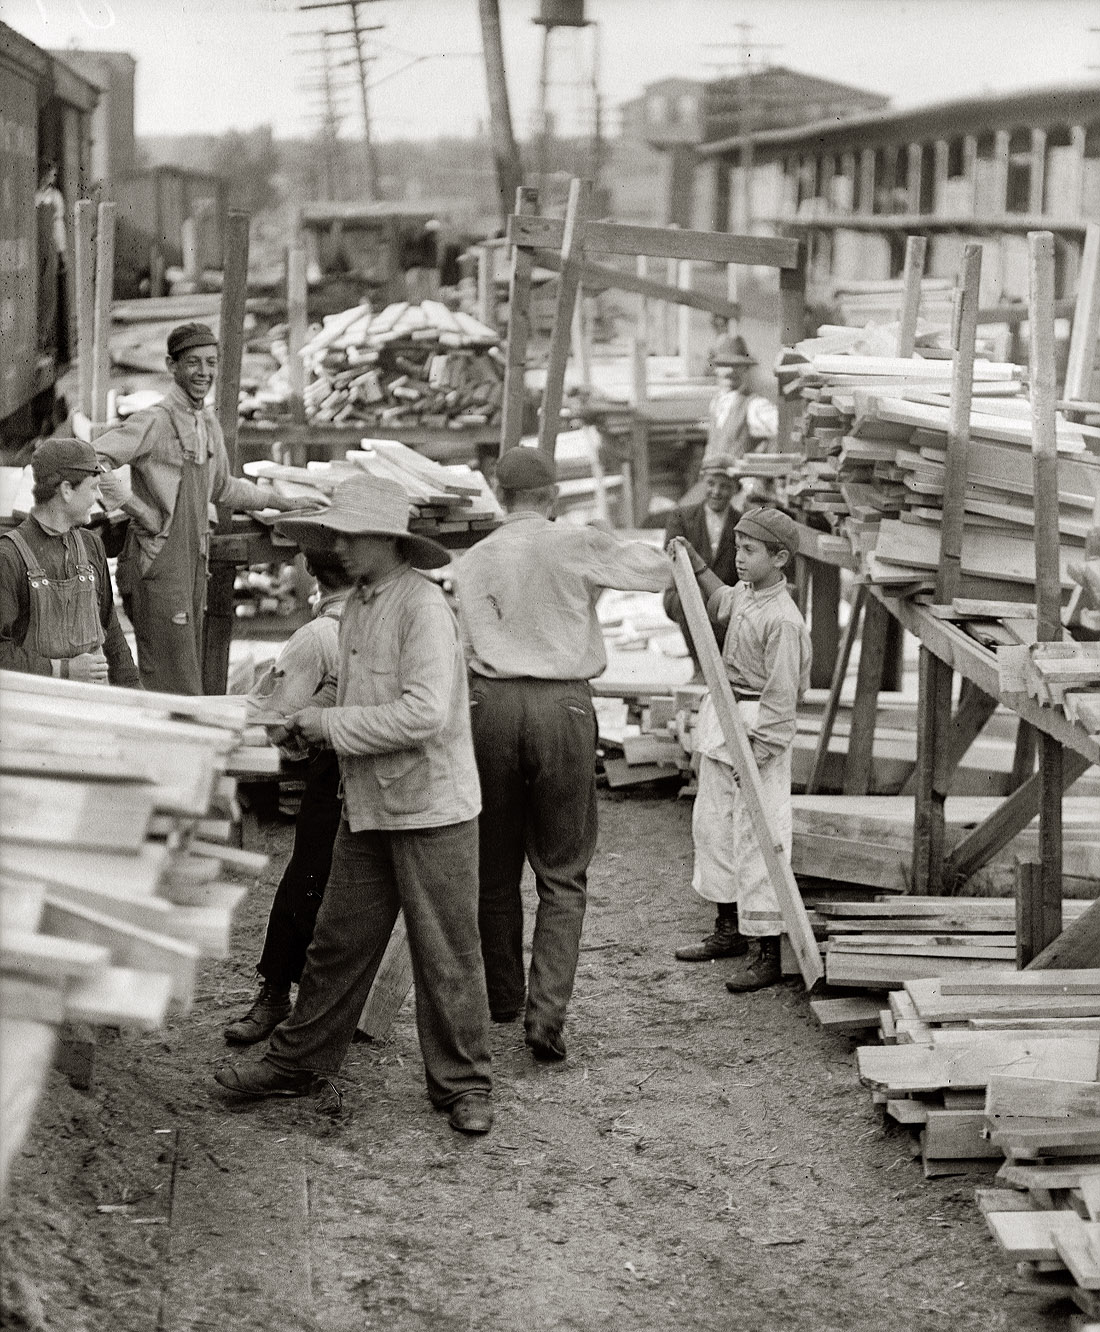 September 1910. "Boys working for Hickok Lumber Company. Burlington, Vermont." Photograph by Lewis Wickes Hine. View full size.